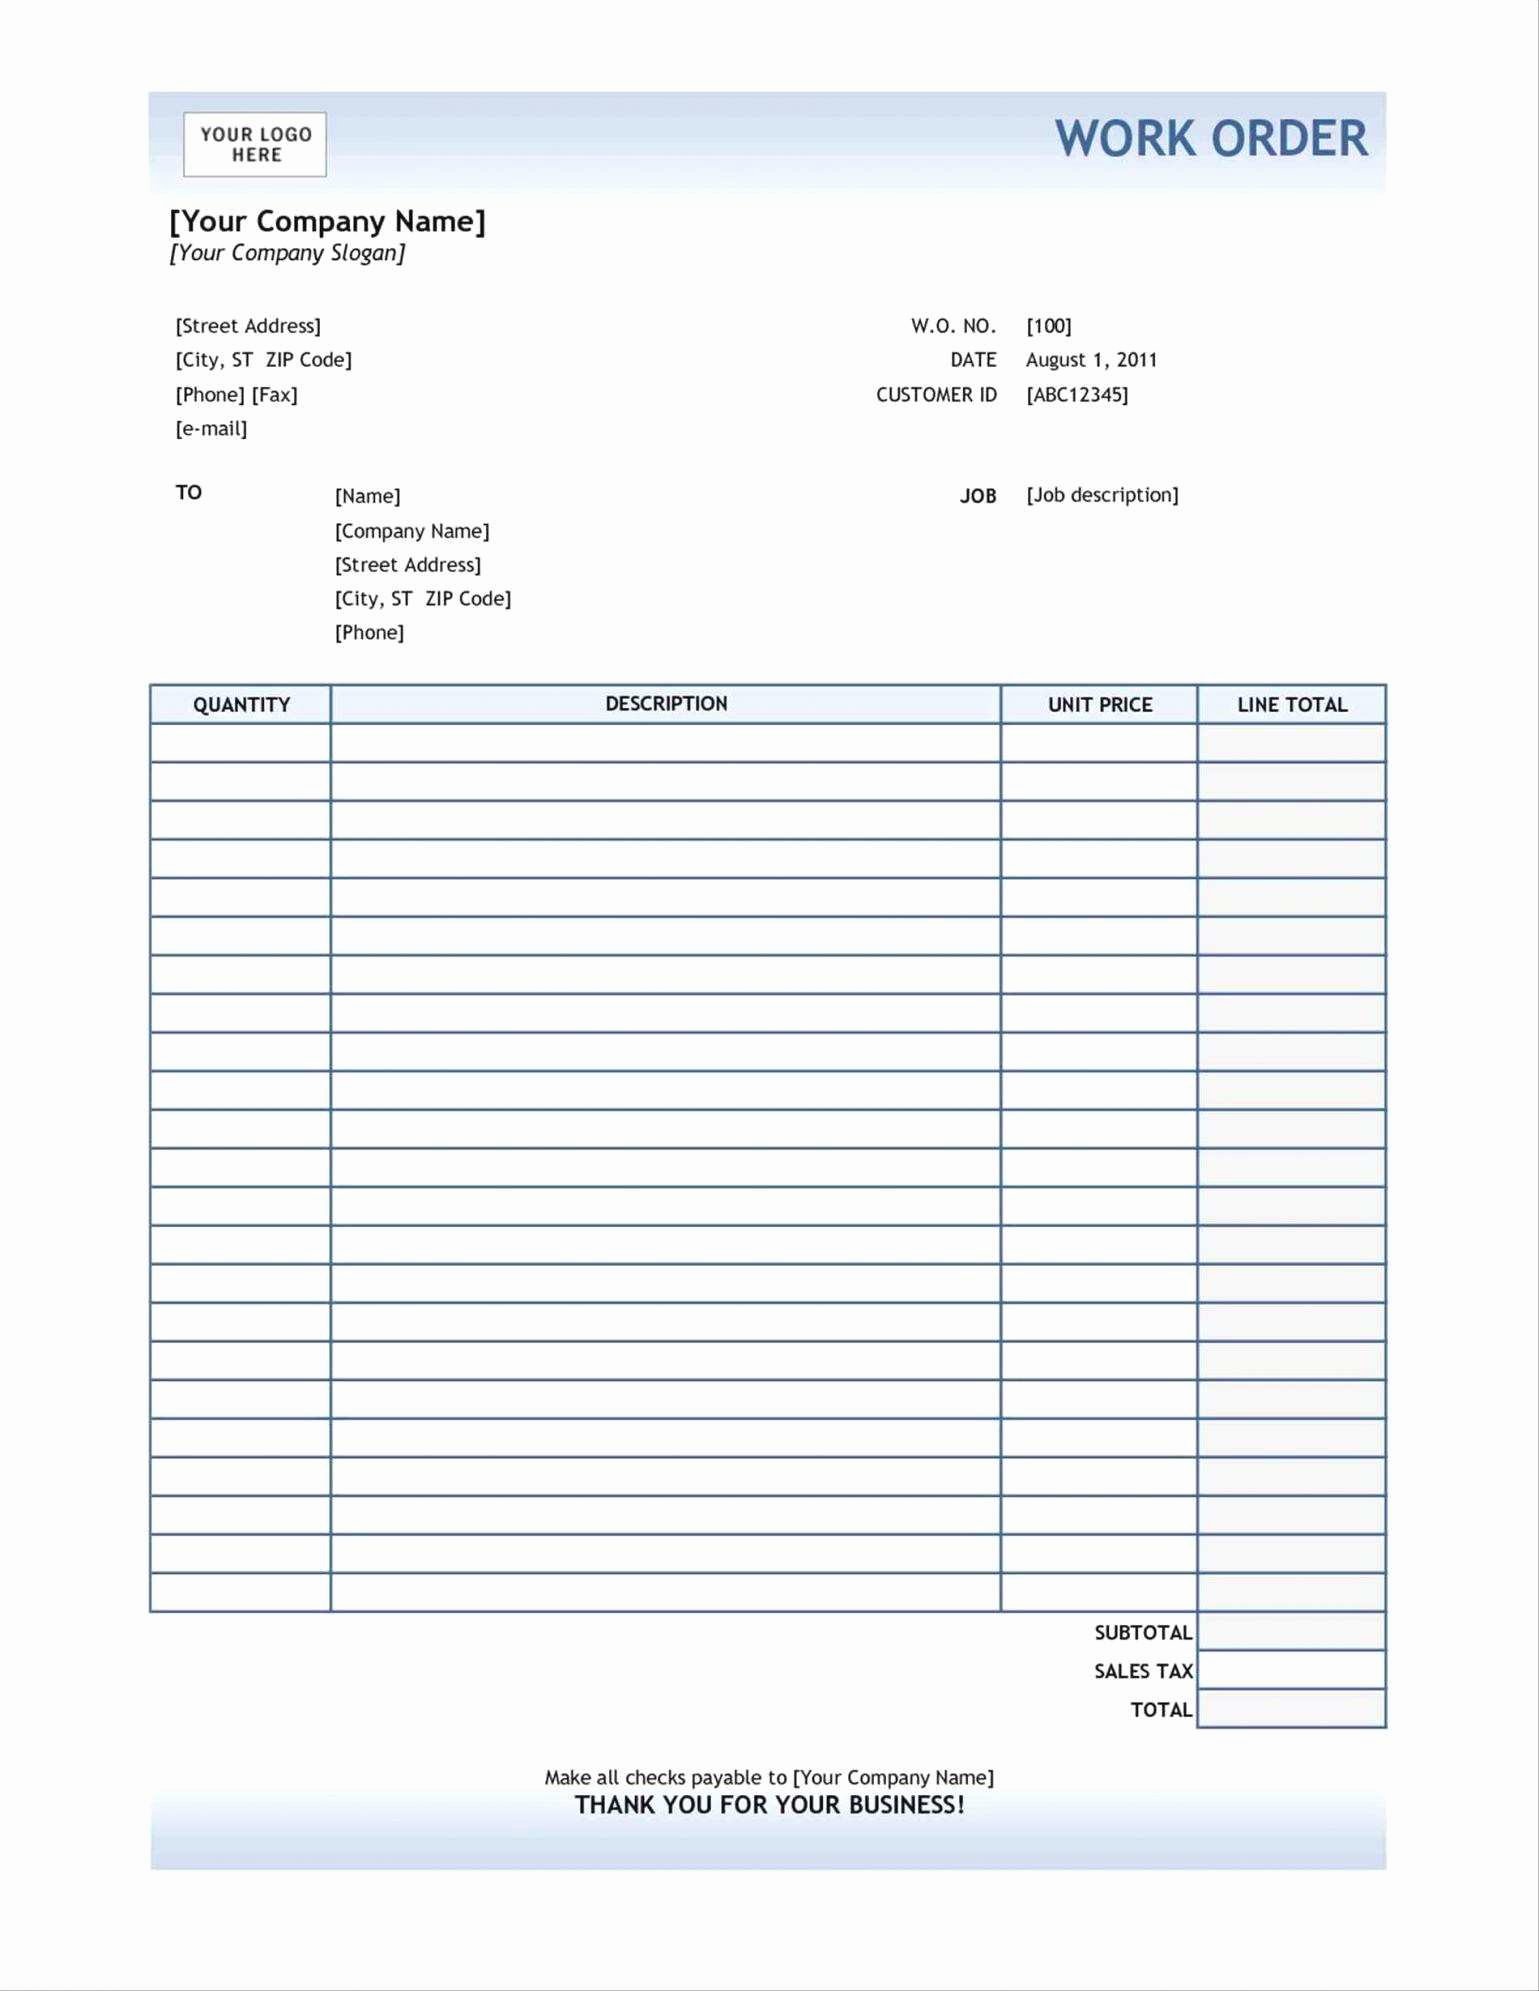 Adp Pay Stub Template Inspirational Lovely Adp Pay Stub Template Pdf